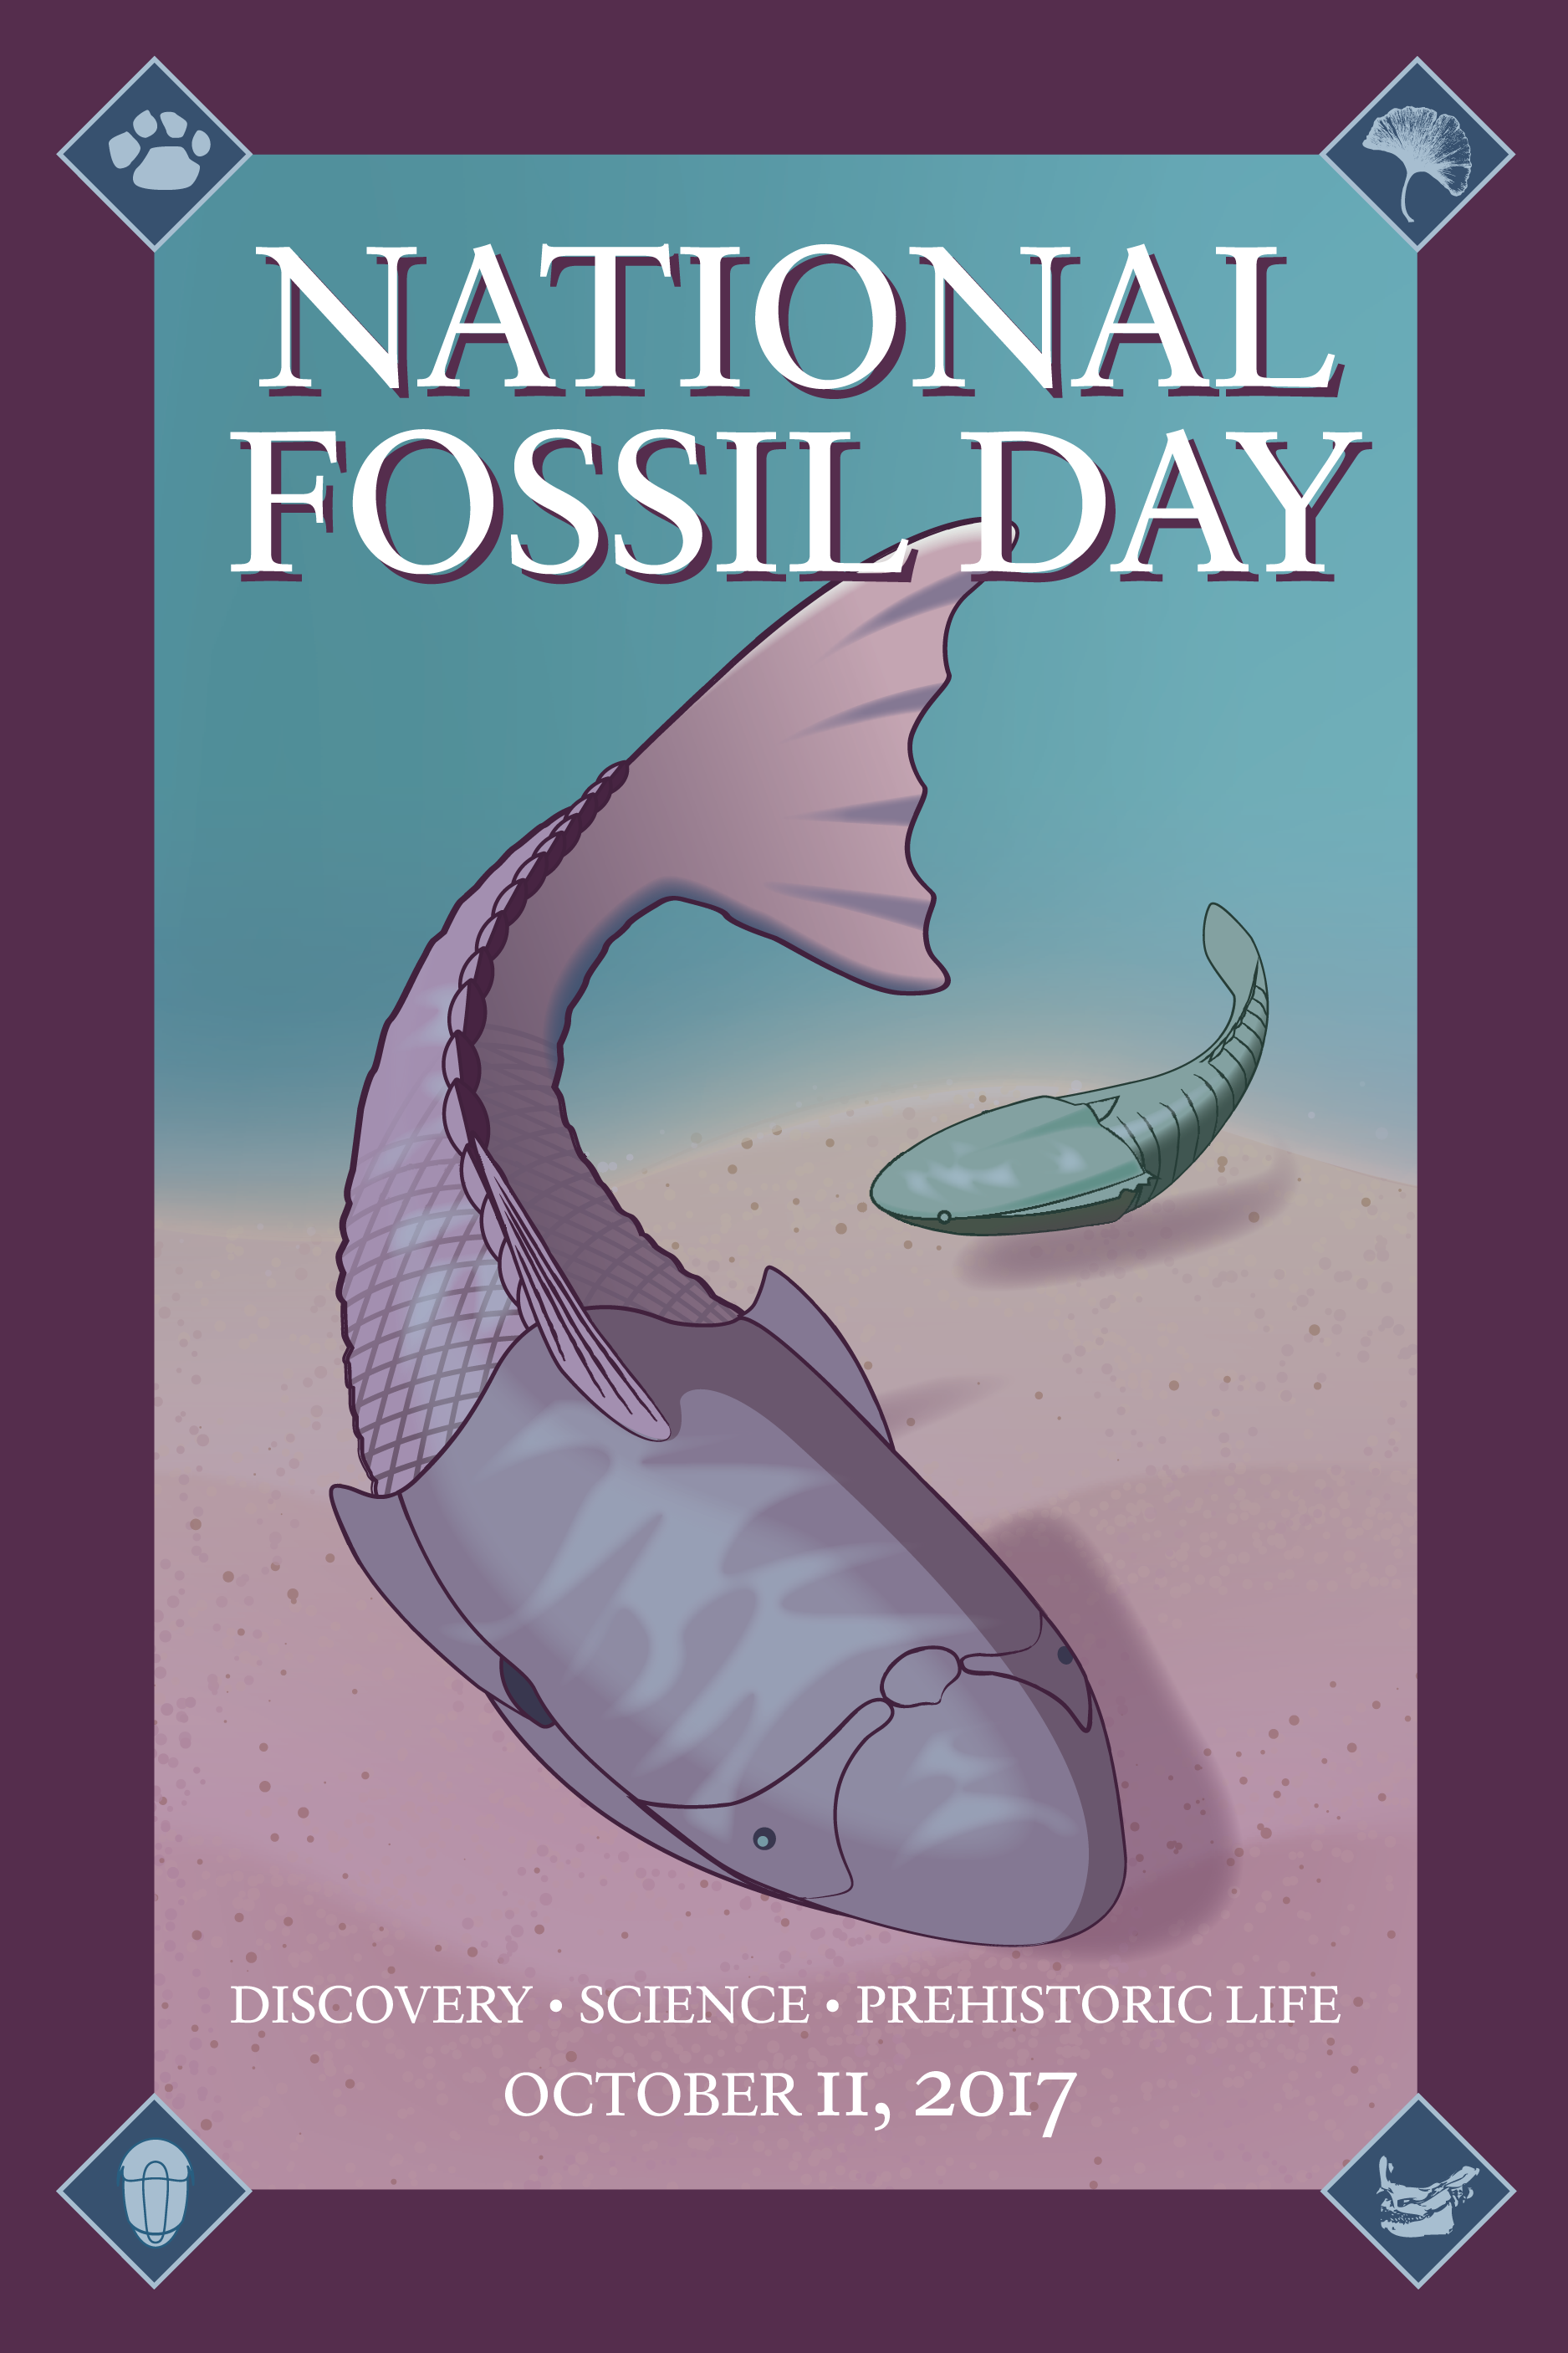 National Fossil Day™ 2017 Artwork - National Fossil Day (U.S. National